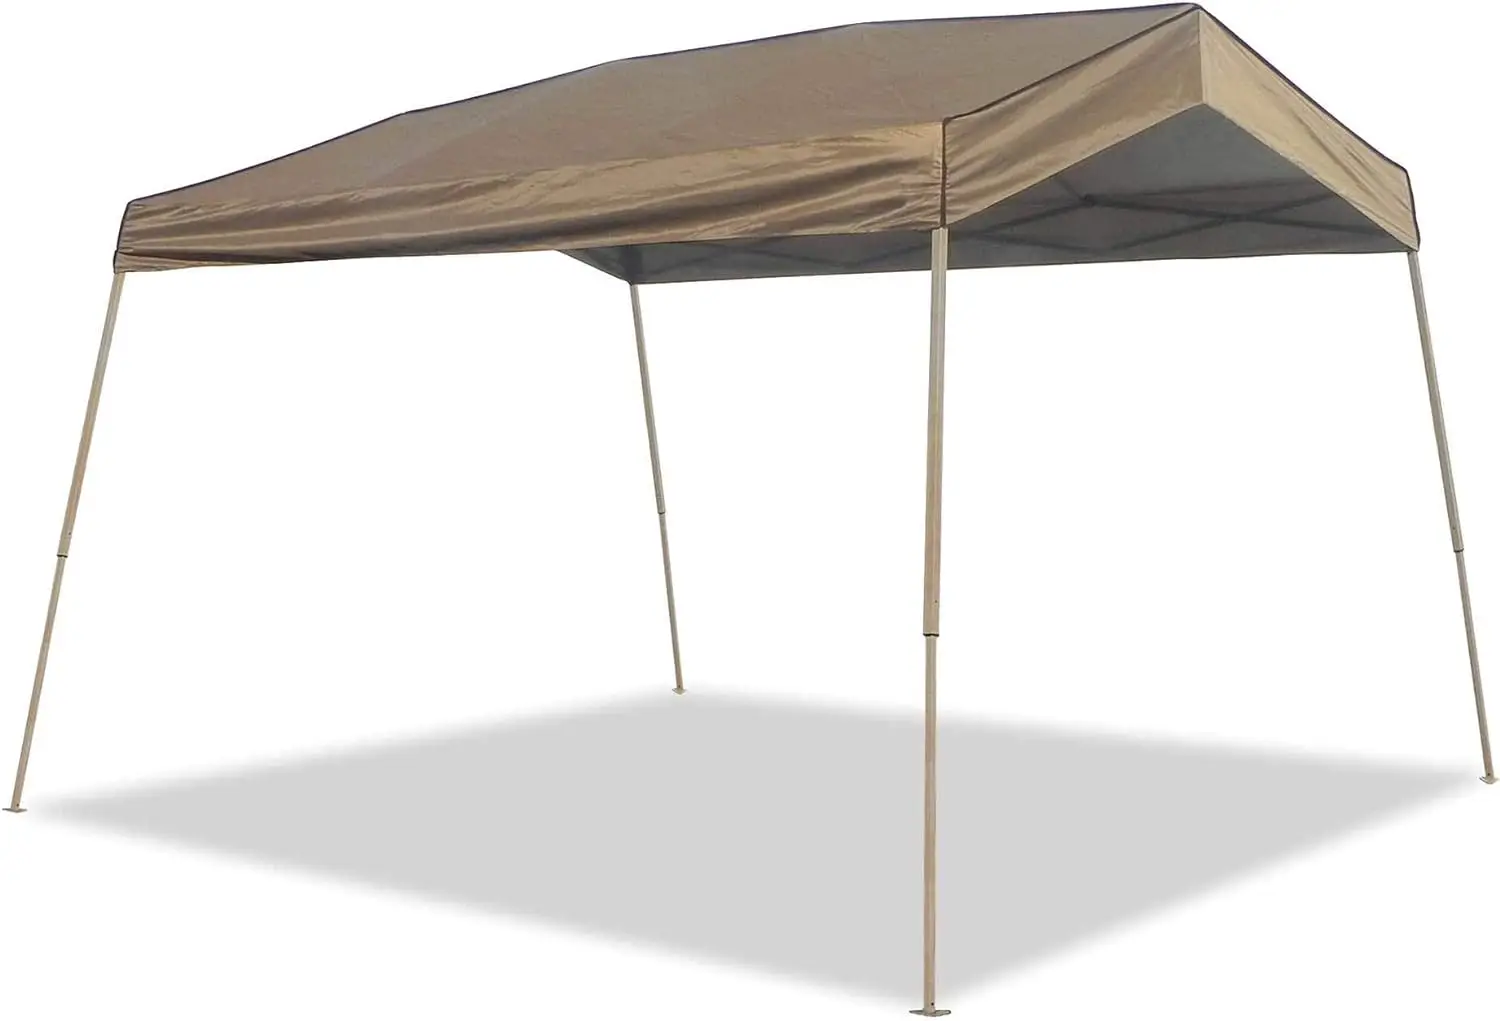 

x 14 Foot Panorama Instant Pop Up Canopy Tent Outdoor Shelter Tent with Reliable Stakes, Steel Frame, and Rolling Bag, Tan Flatb